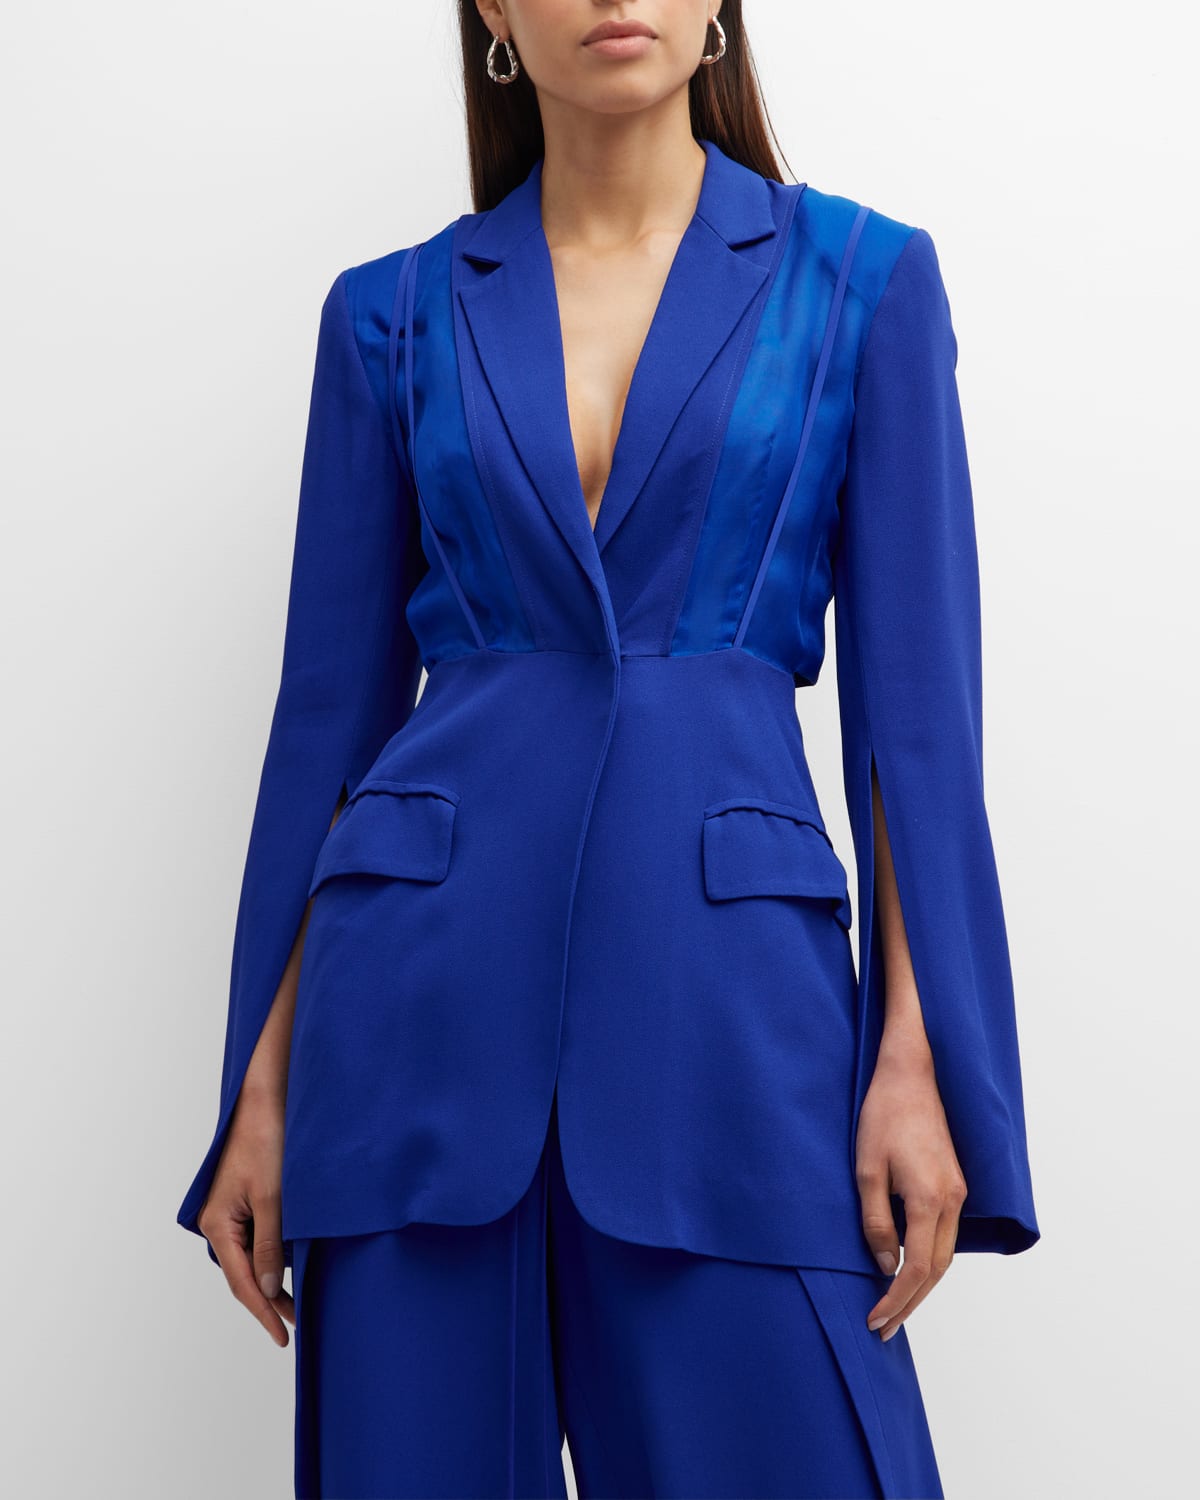 Jason Wu Collection Mixed Media Blazer Jacket with Suspender Detail